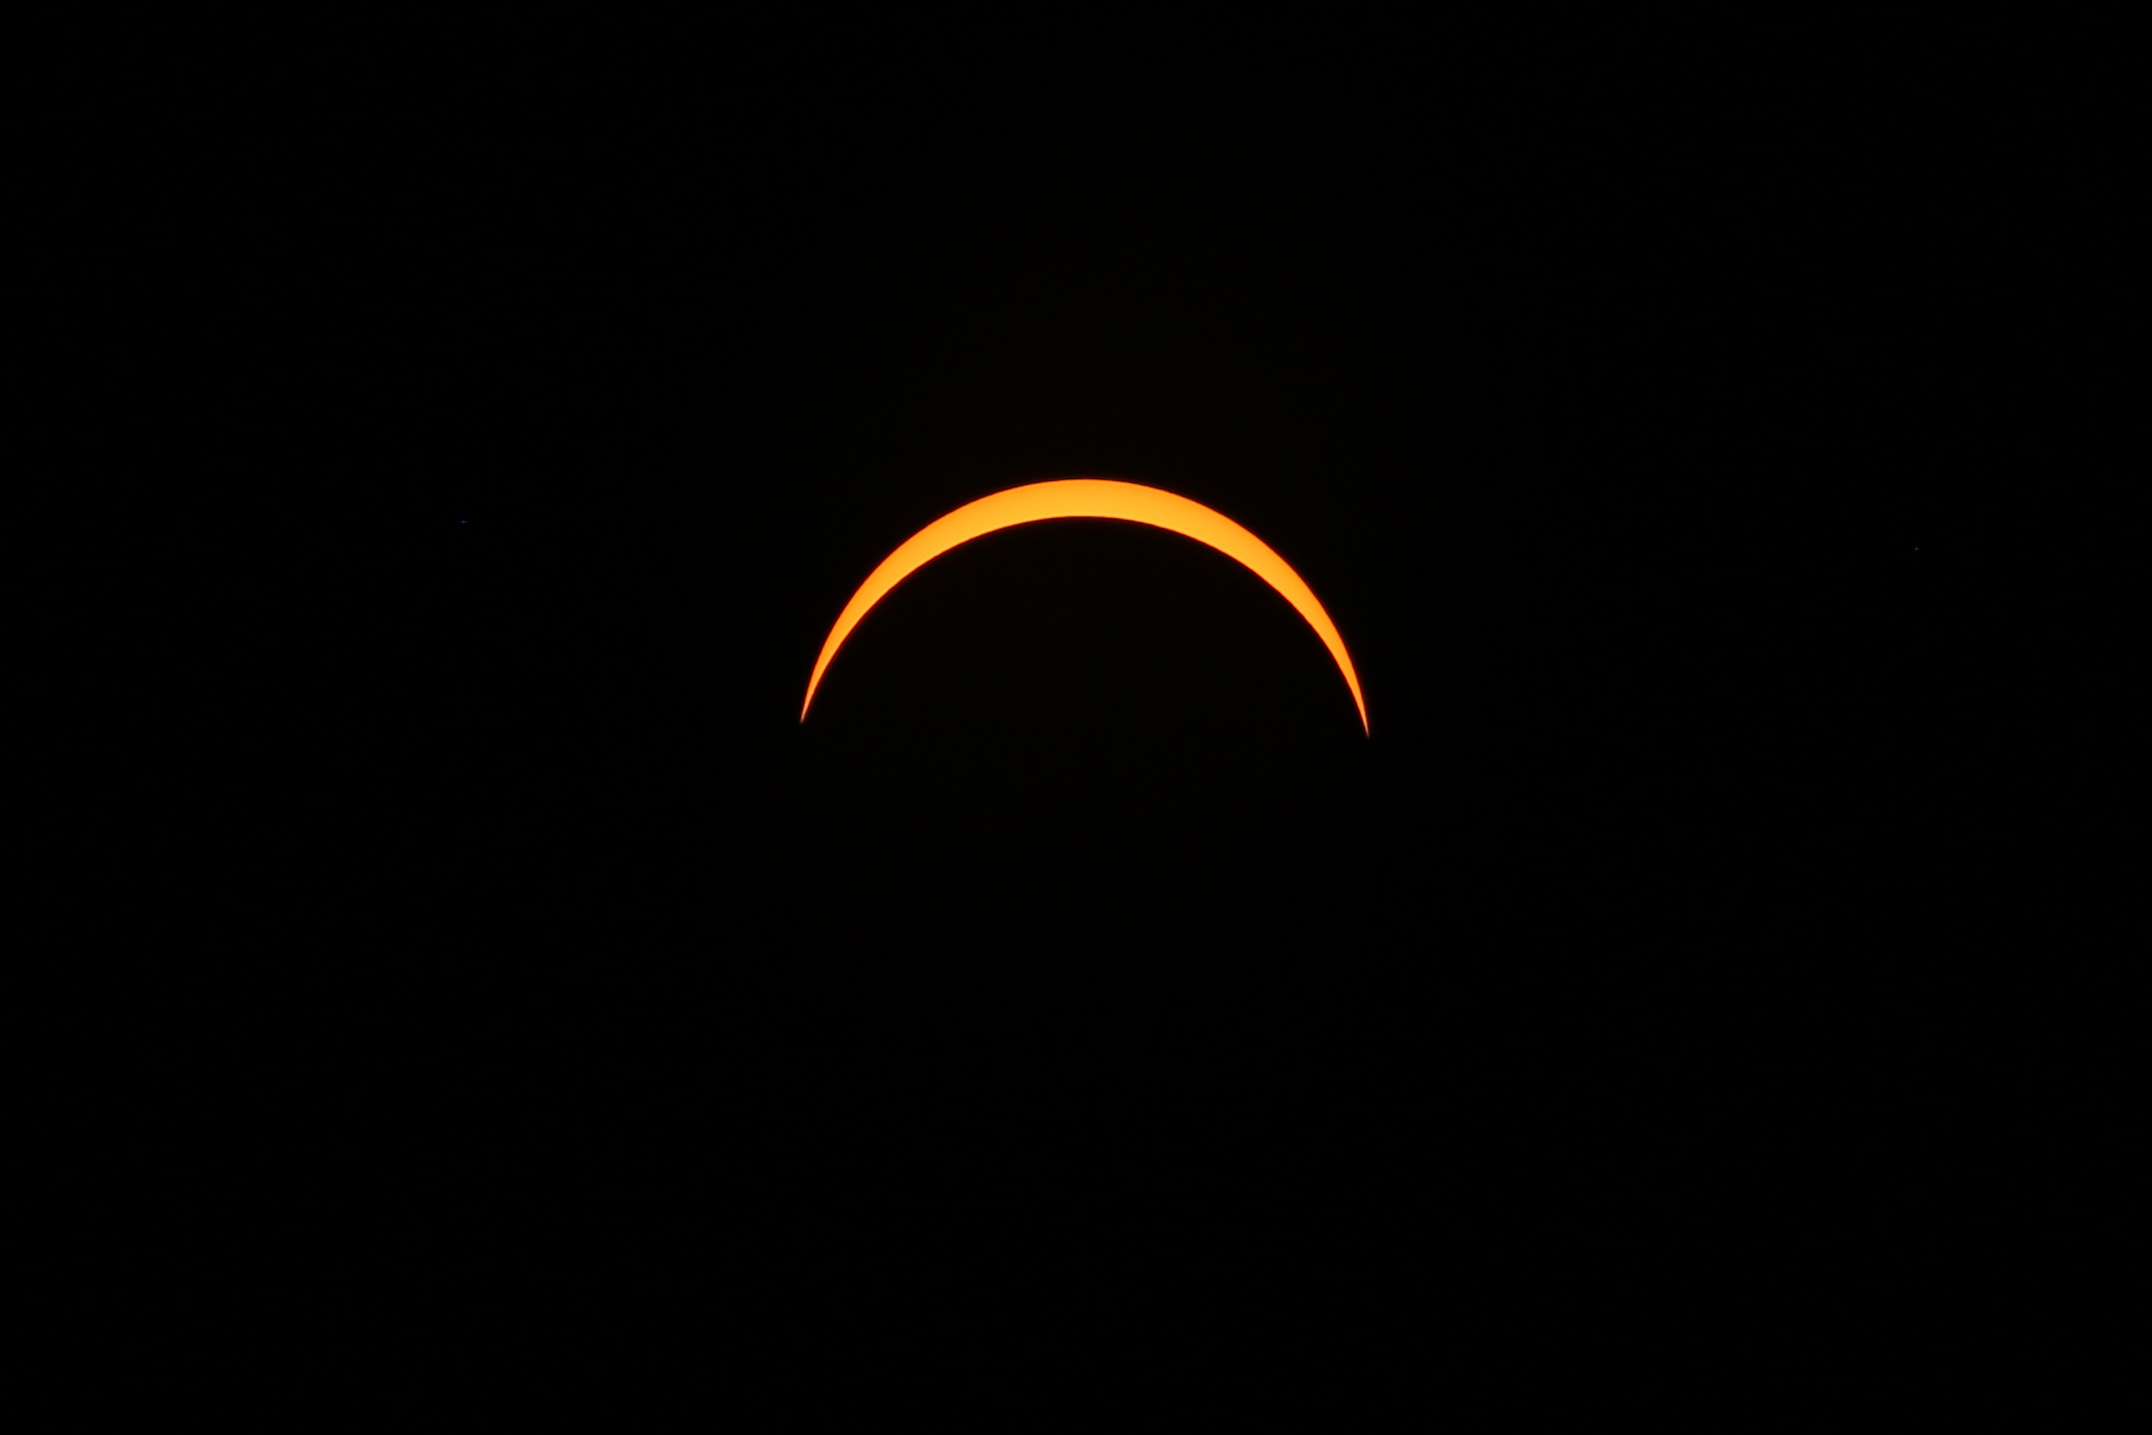 Total Solar eclipse image in Durham NC 2017. There is just a crescent of sun showing at the top